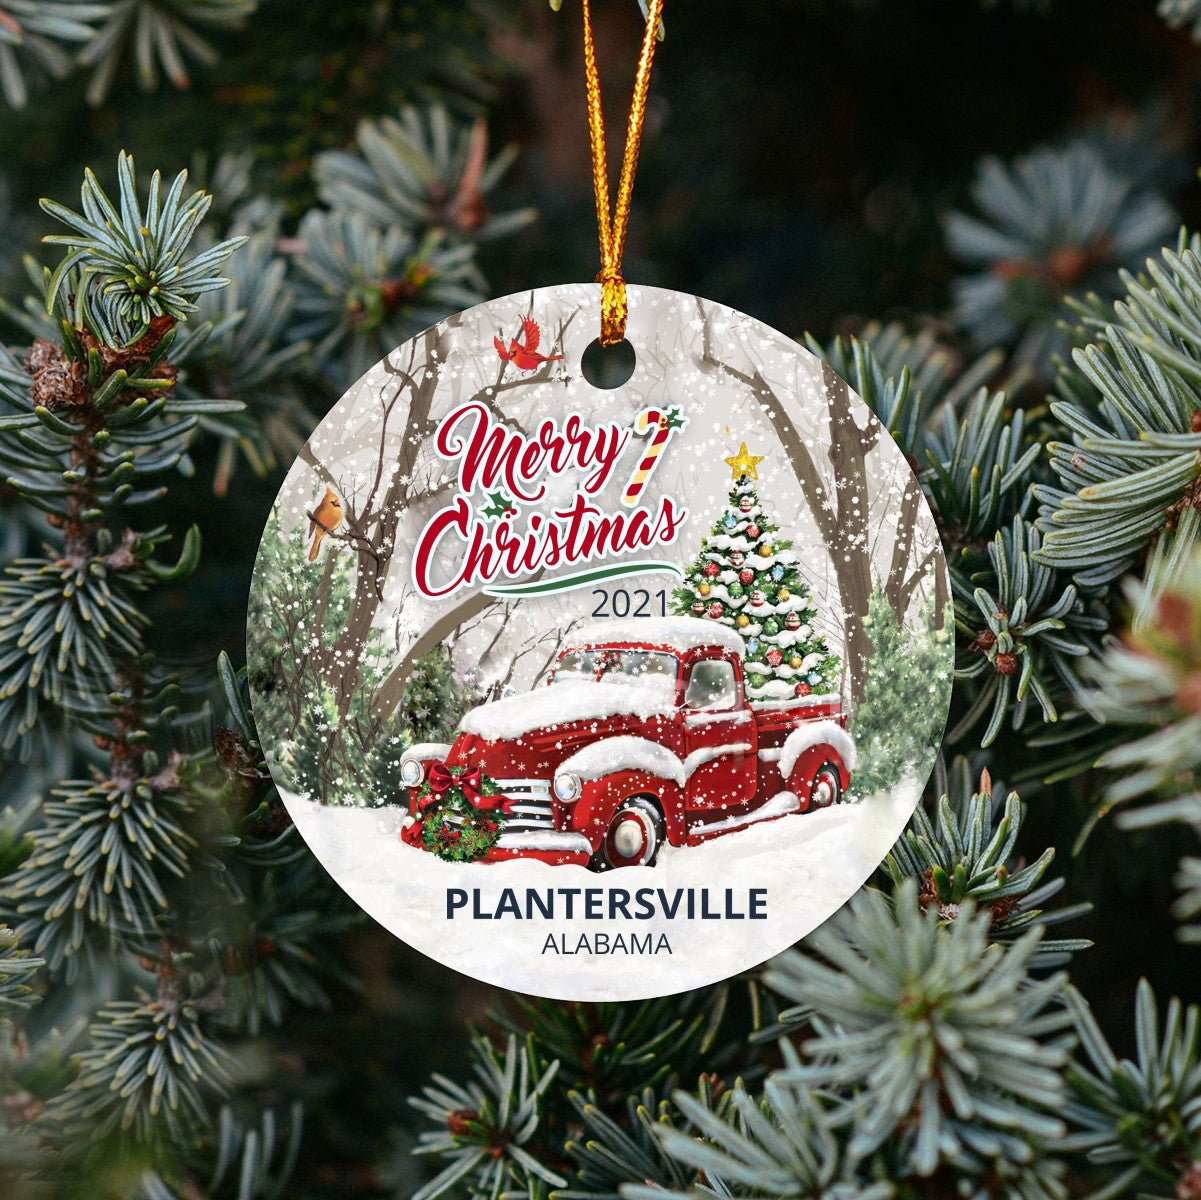 Christmas Tree Ornaments Plantersville - Ornament Customize With Name City And State Plantersville Alabama AL - Red Truck Xmas Ornaments 3'' Plastic Gift For Family, Friend And Housewarming